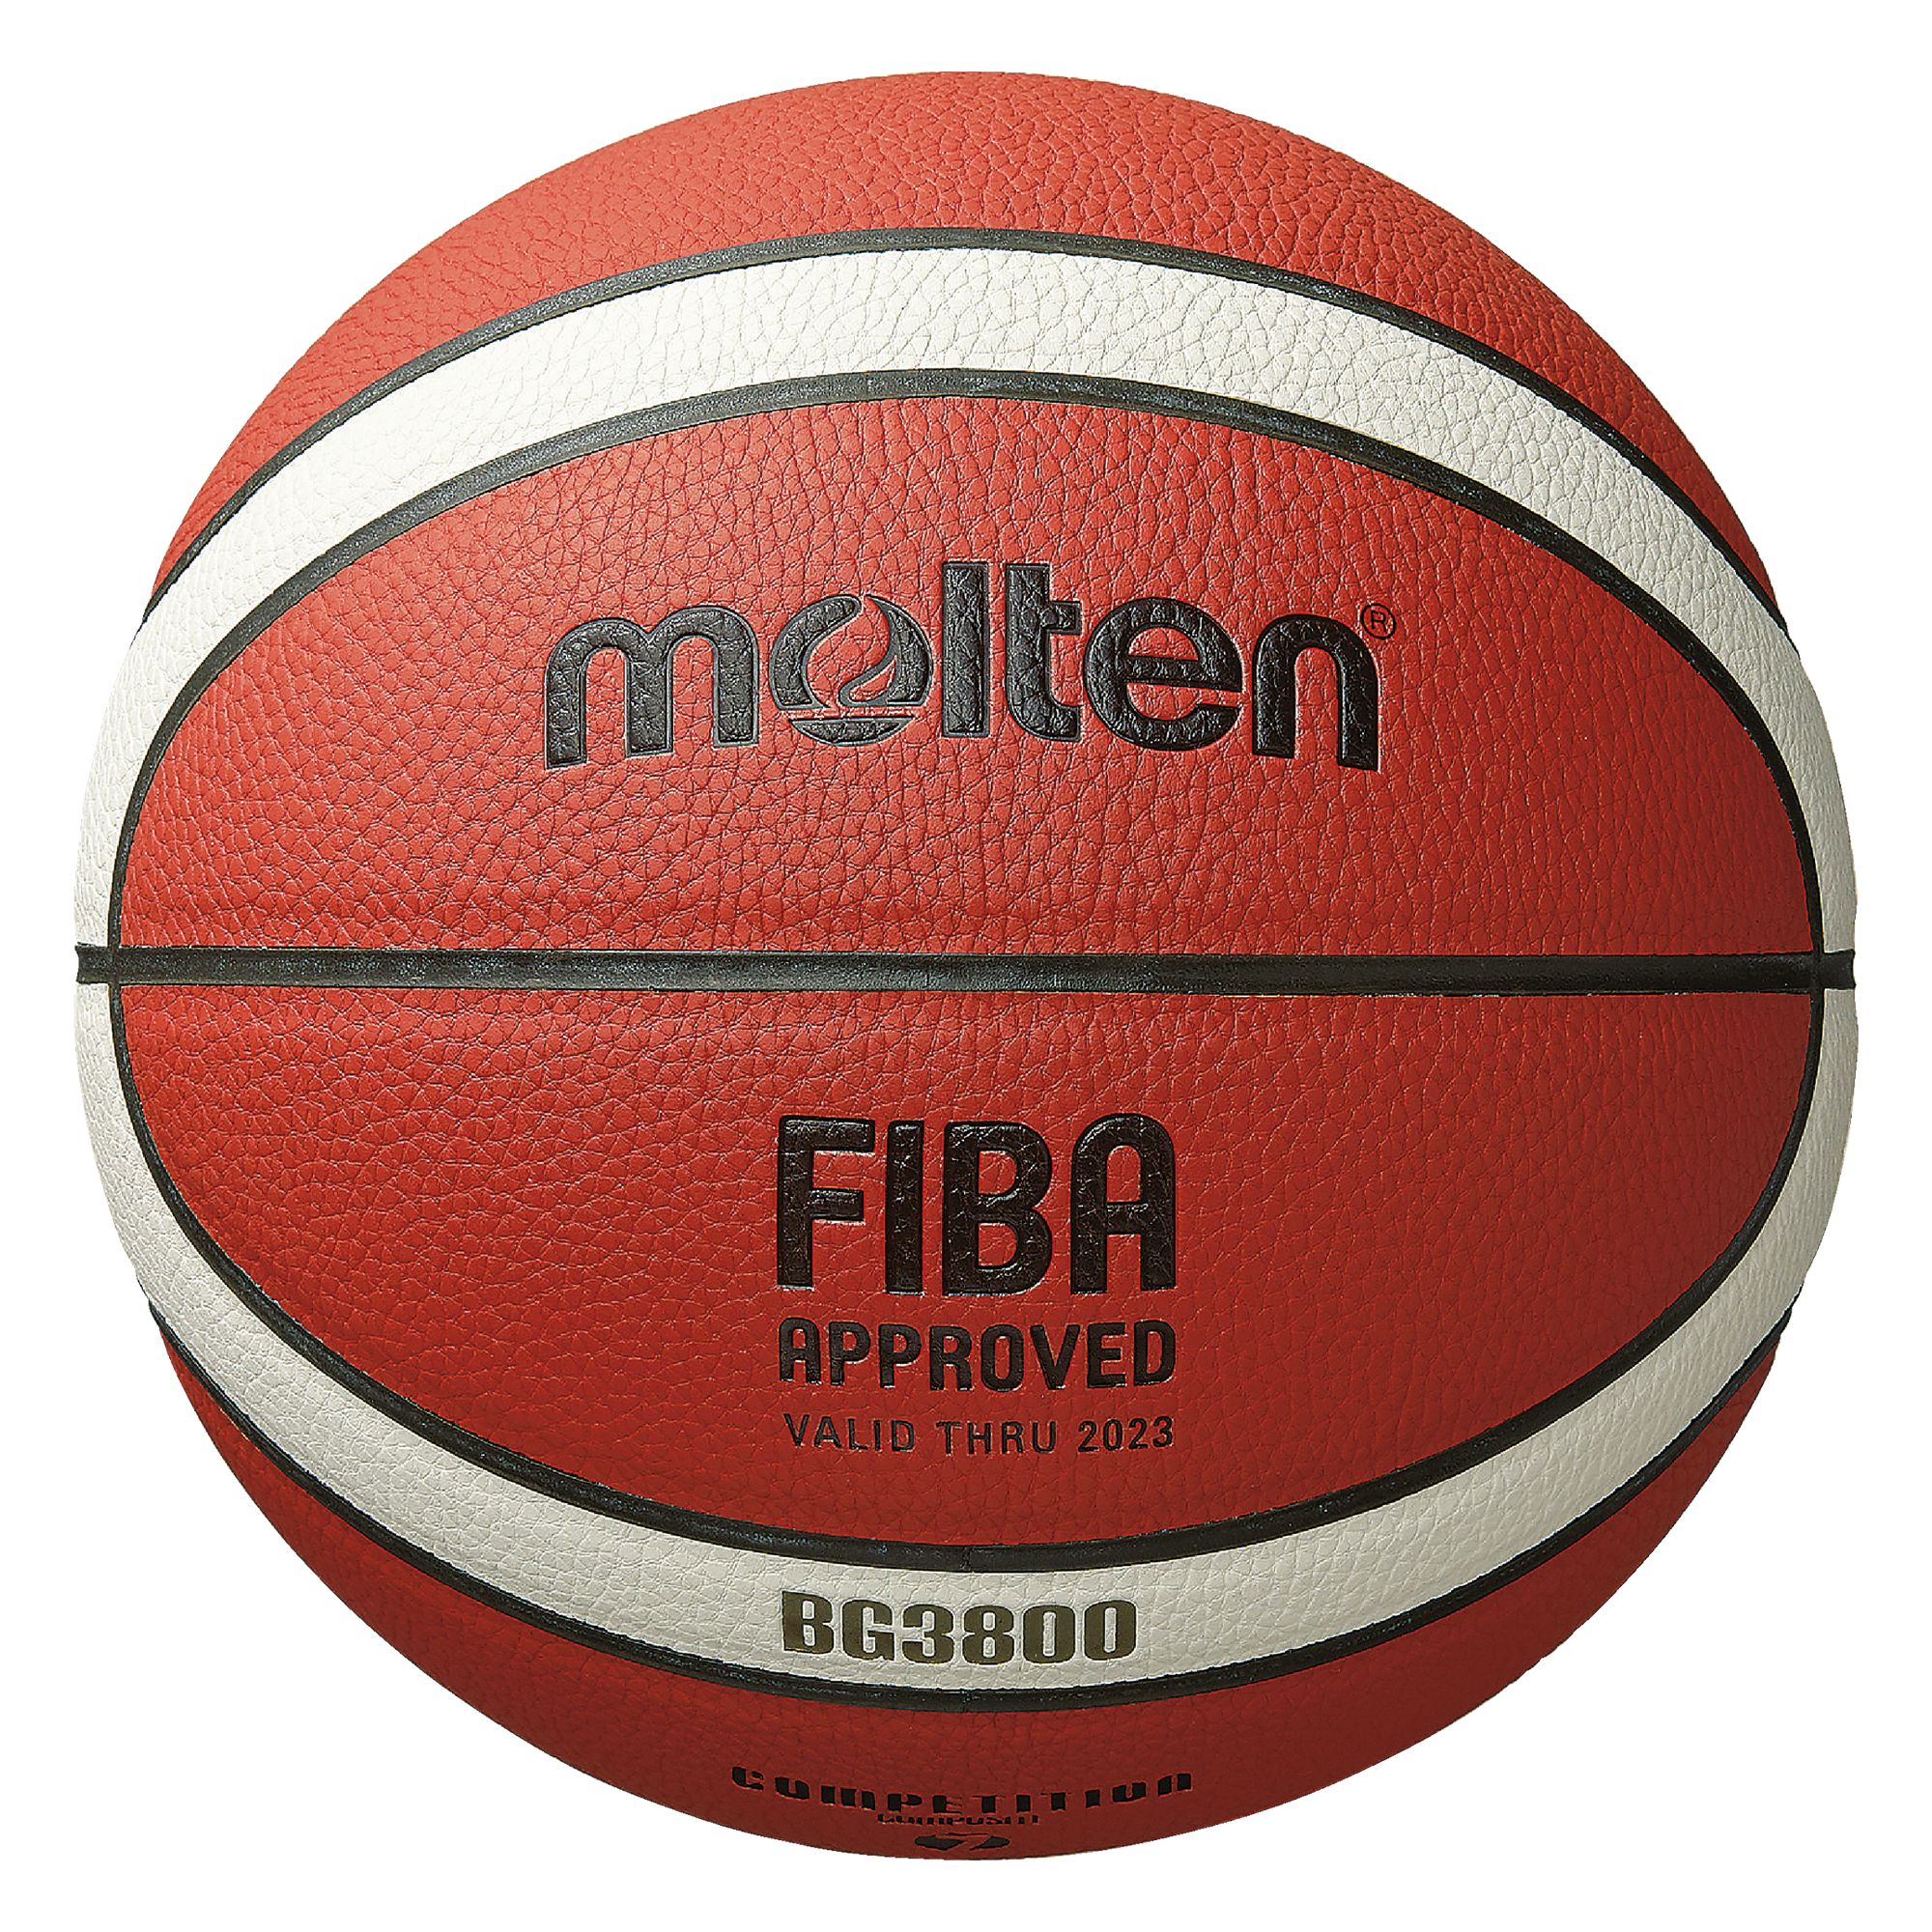 molten-basketball-B5G3800_7176a6c2-a3f5-4ce0-8606-935aadc703a0.png